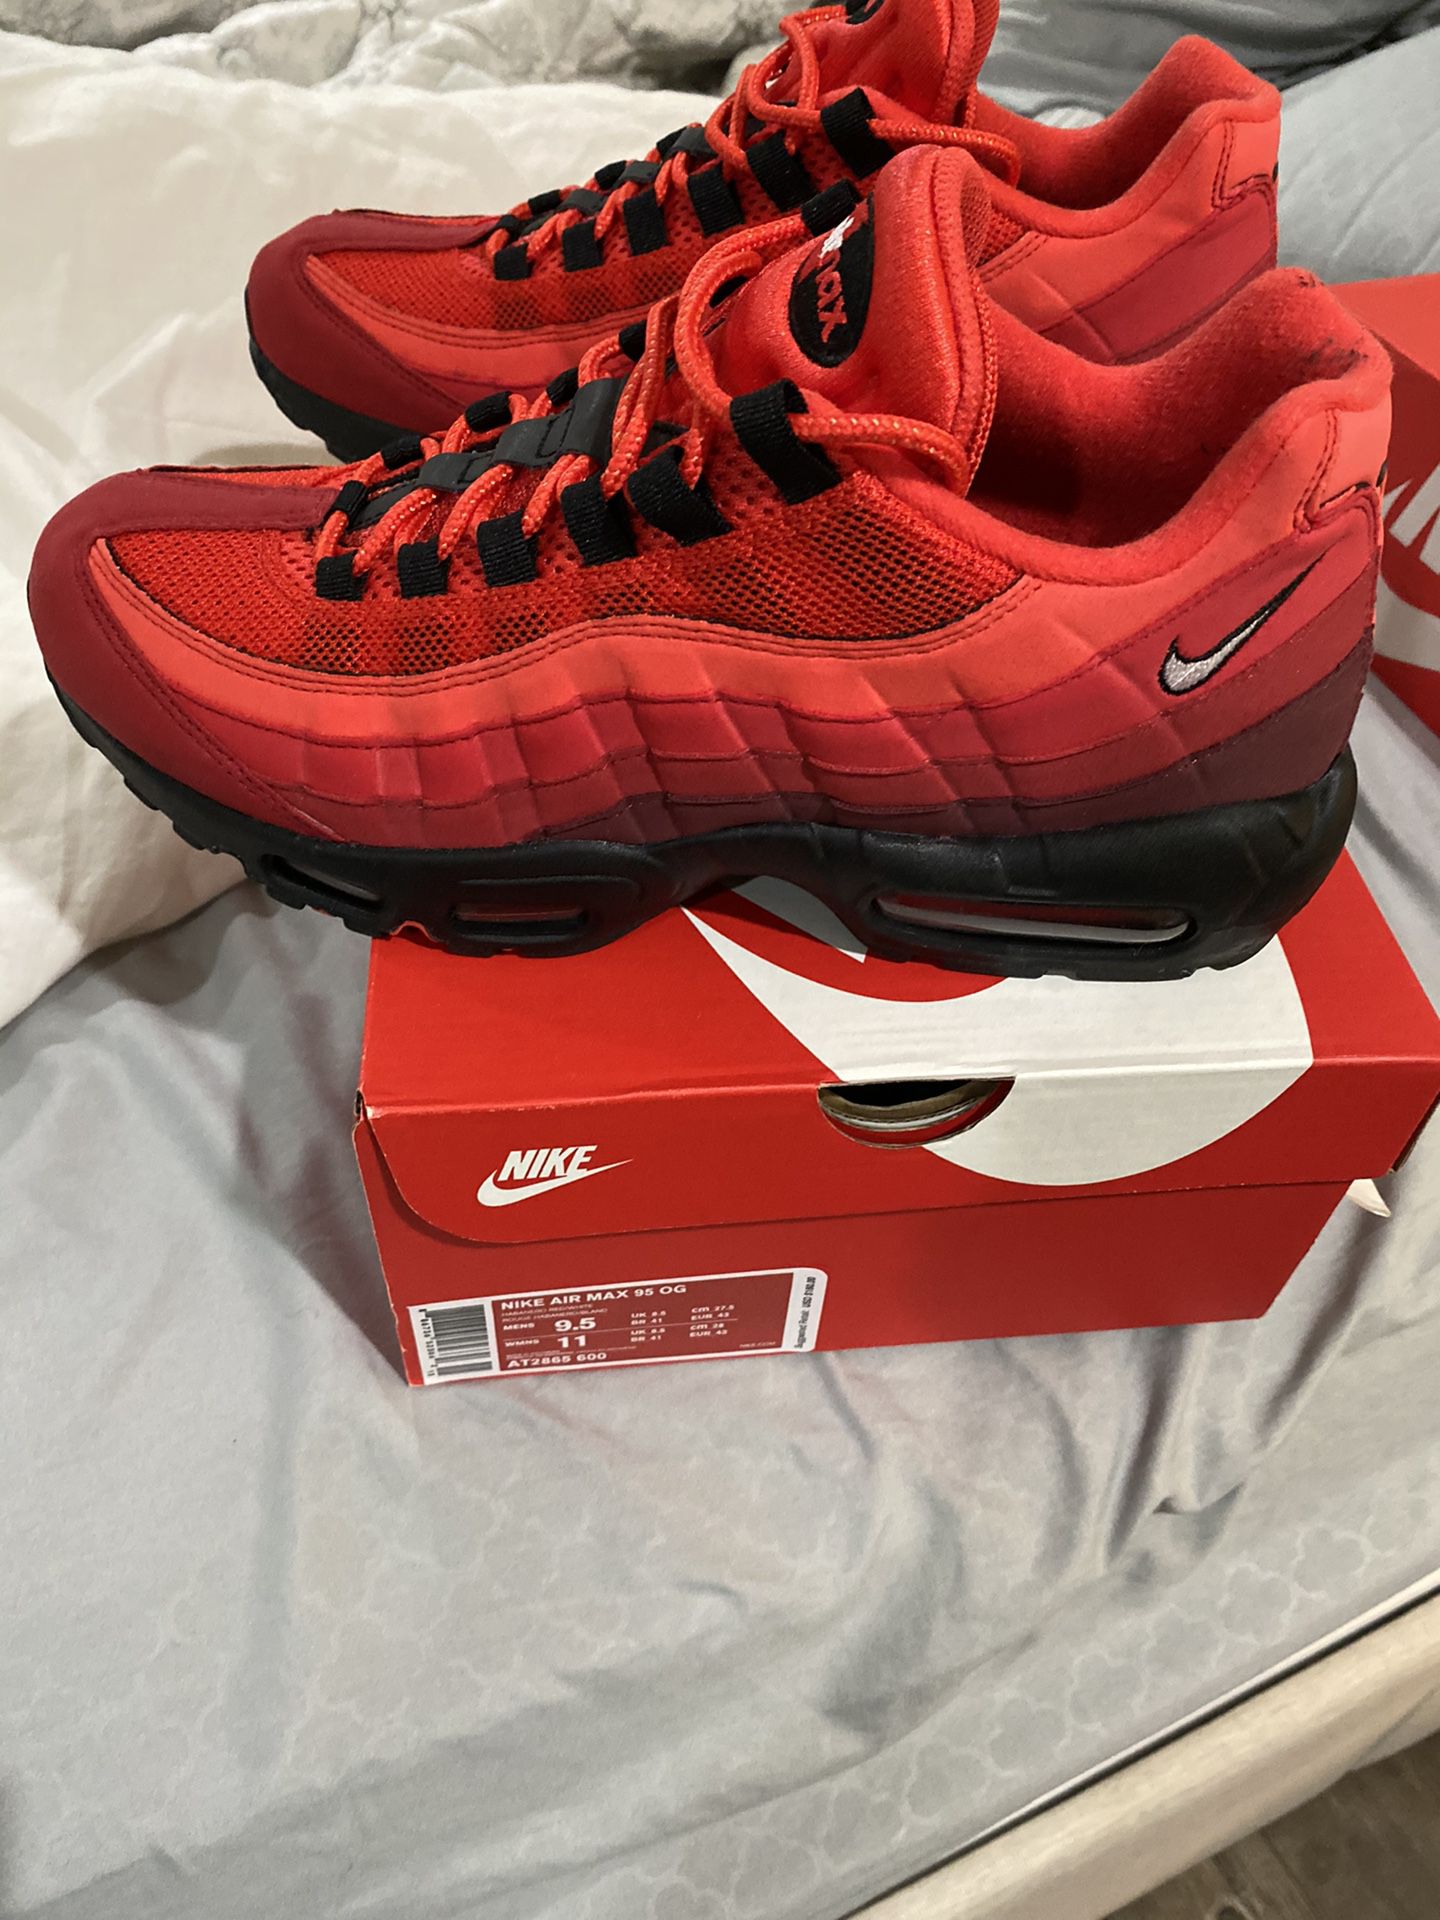 100% Authentic Nike Air Max 95 Habanero - Size 9.5 - Mint Condition